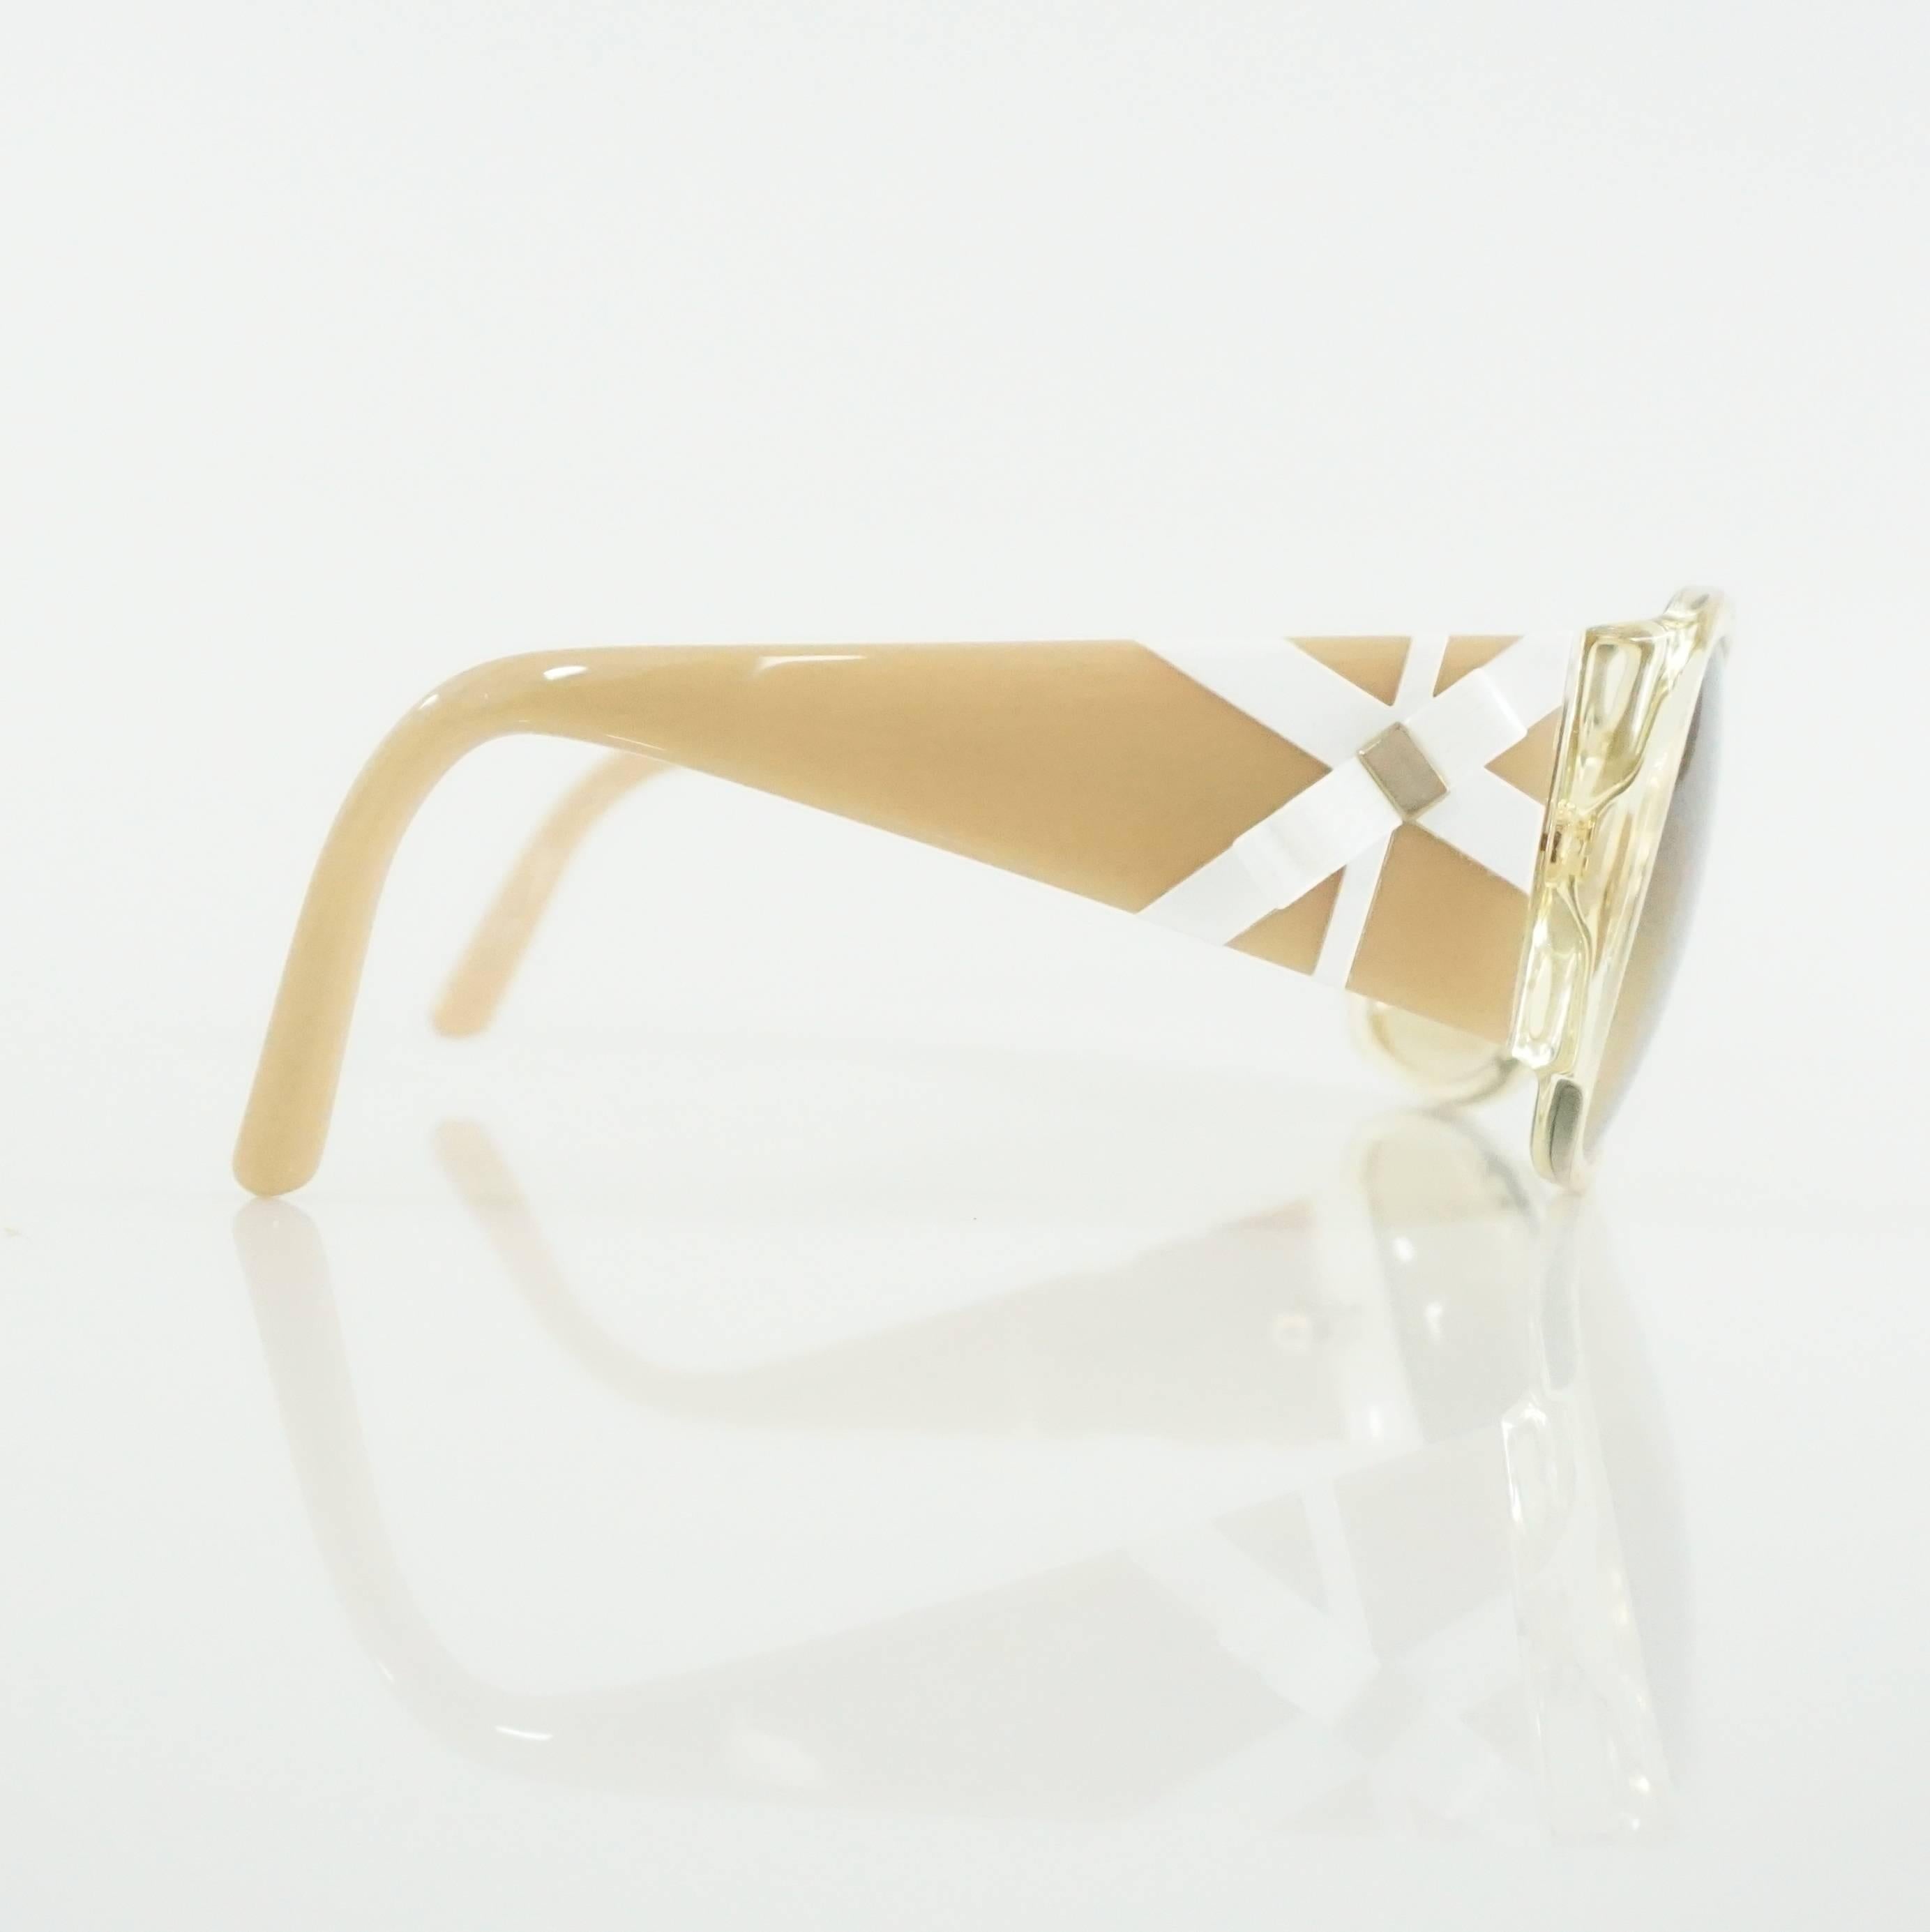 These Versace sunglasses are beige with tan lenses. On the sides are white detailing and a white bow with gold detailing. These sunglasses are in excellent condition.

Measurements
Front Length: 5.5"
Leg Length: 4.75"
Length of Lens: